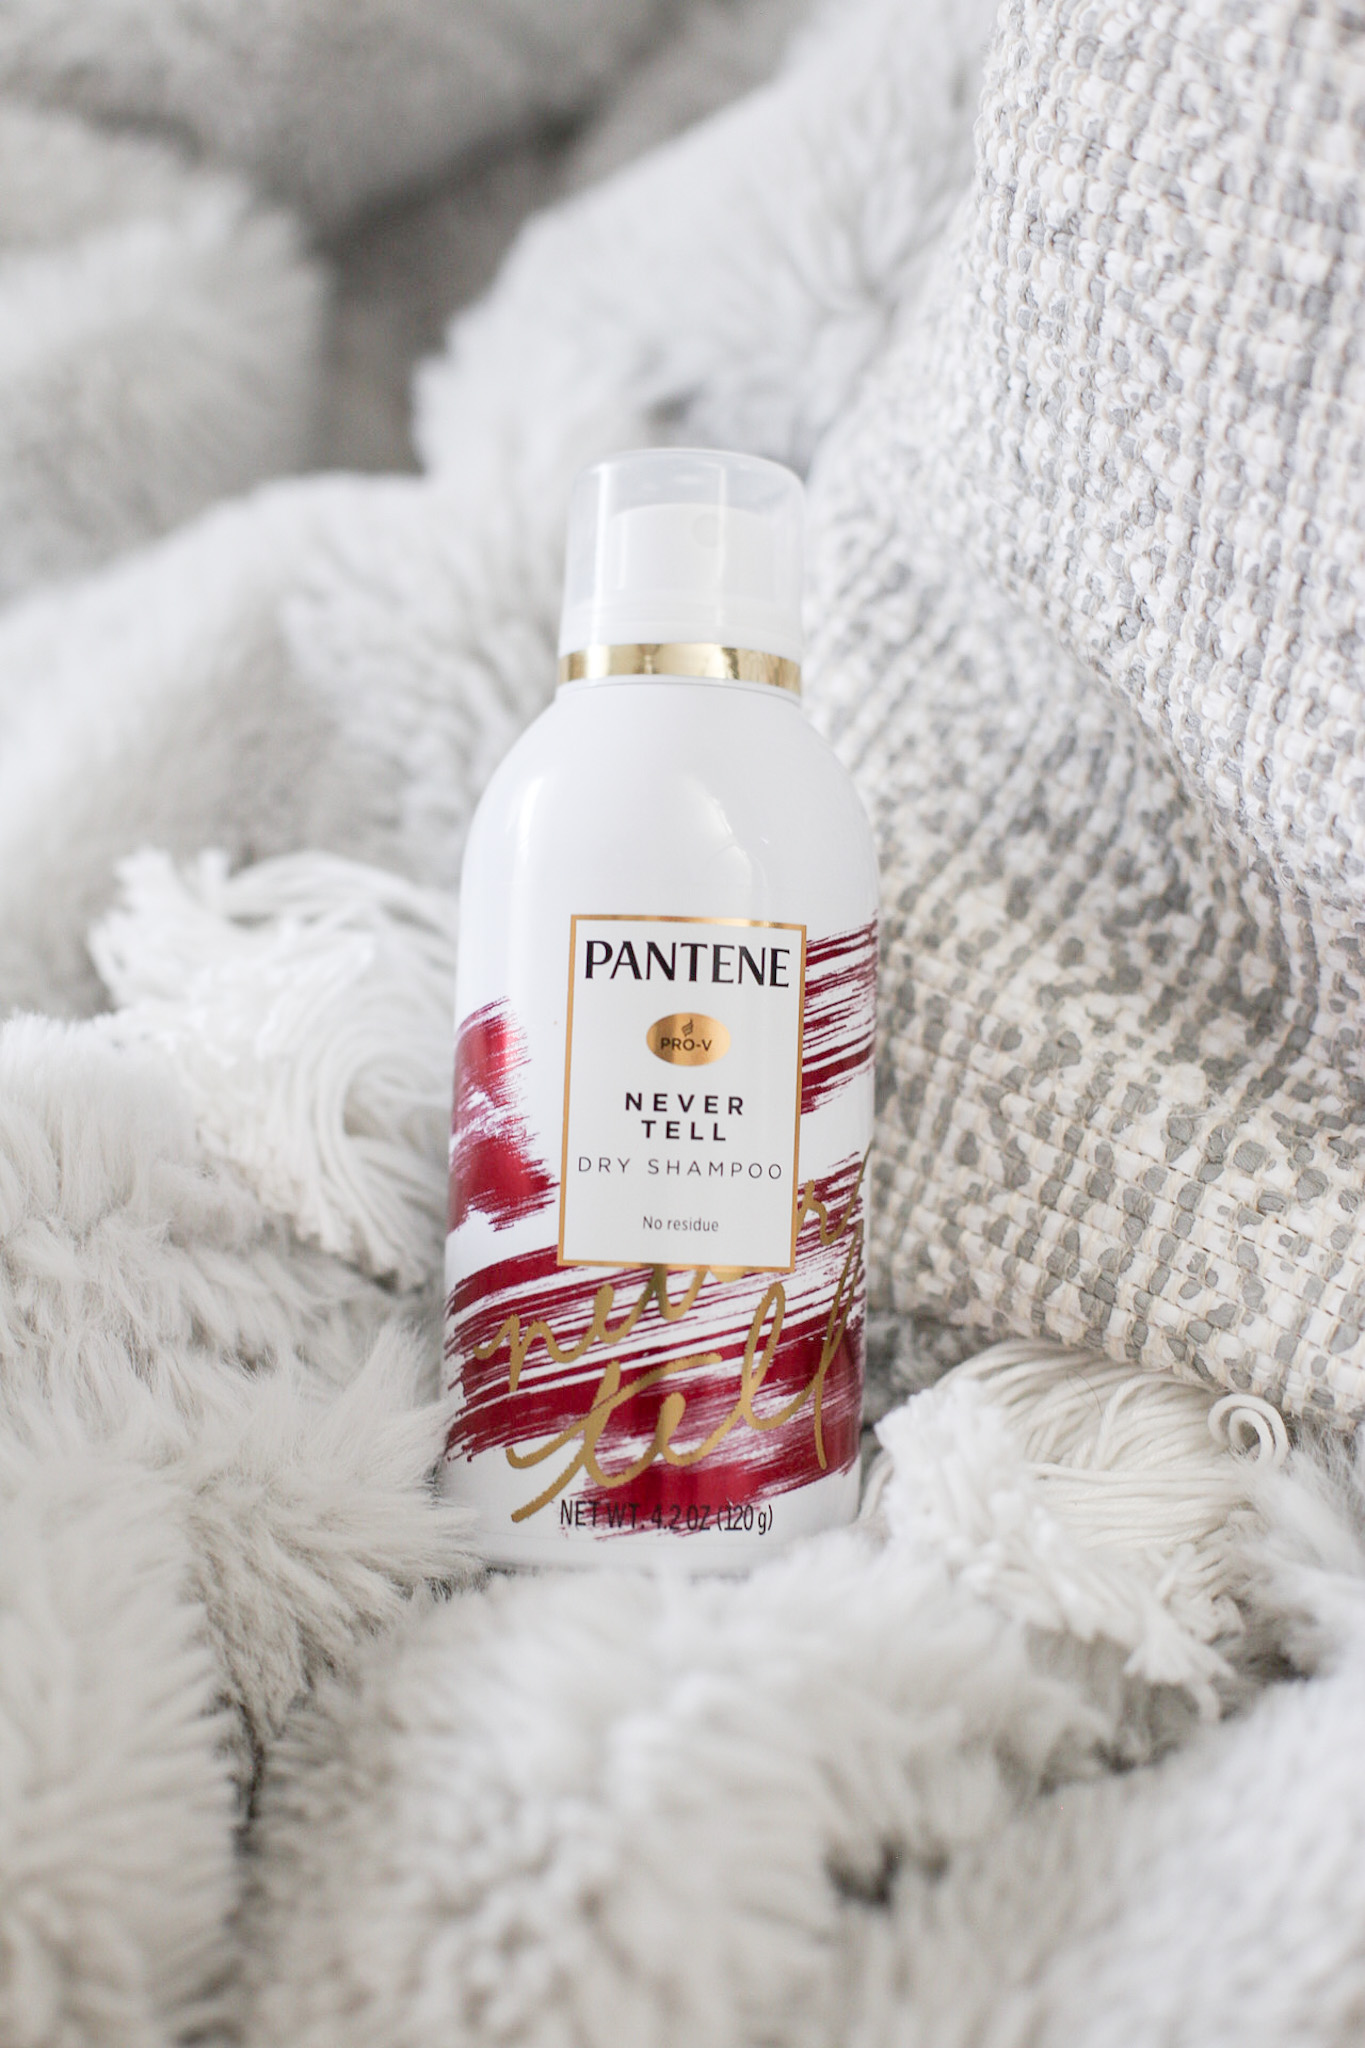 Pantene Never Tell Dry Shampoo Spray with a Sulfate Free Formula Review